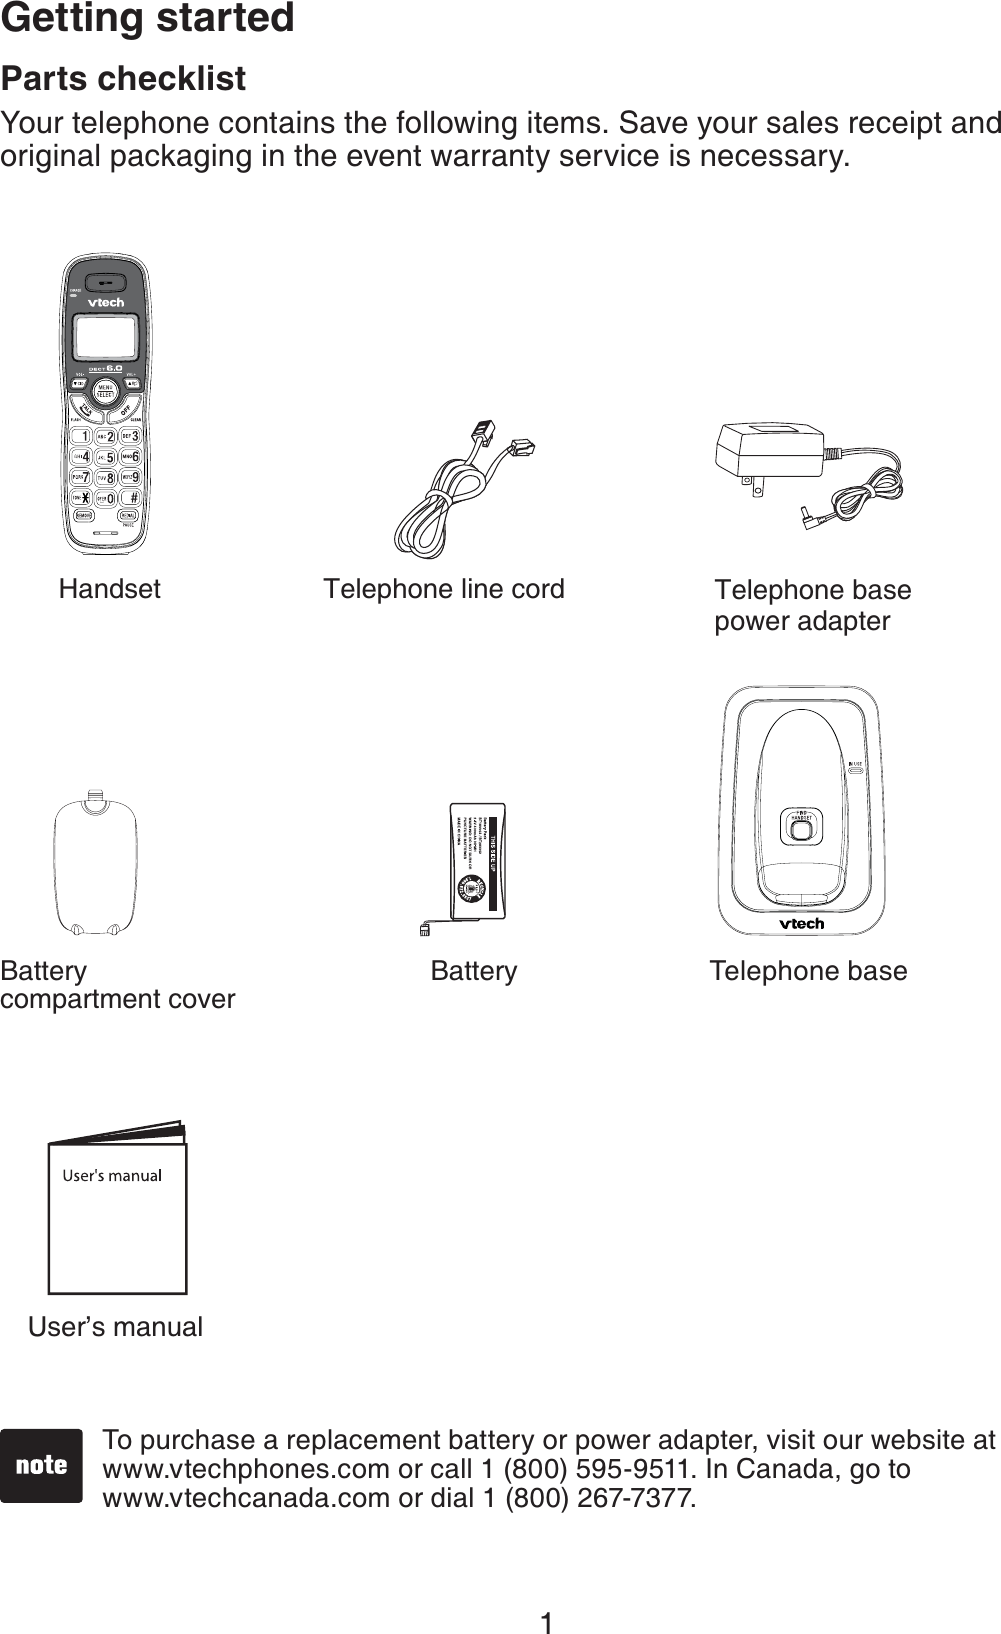 1Parts checklistYour telephone contains the following items. Save your sales receipt and original packaging in the event warranty service is necessary.To purchase a replacement battery or power adapter, visit our website at www.vtechphones.com or call 1 (800) 595-9511. In Canada, go to    www.vtechcanada.com or dial 1 (800) 267-7377.Getting startedUser’s manualHandsetTelephone baseTelephone base power adapterTelephone line cordBatteryBatterycompartment cover